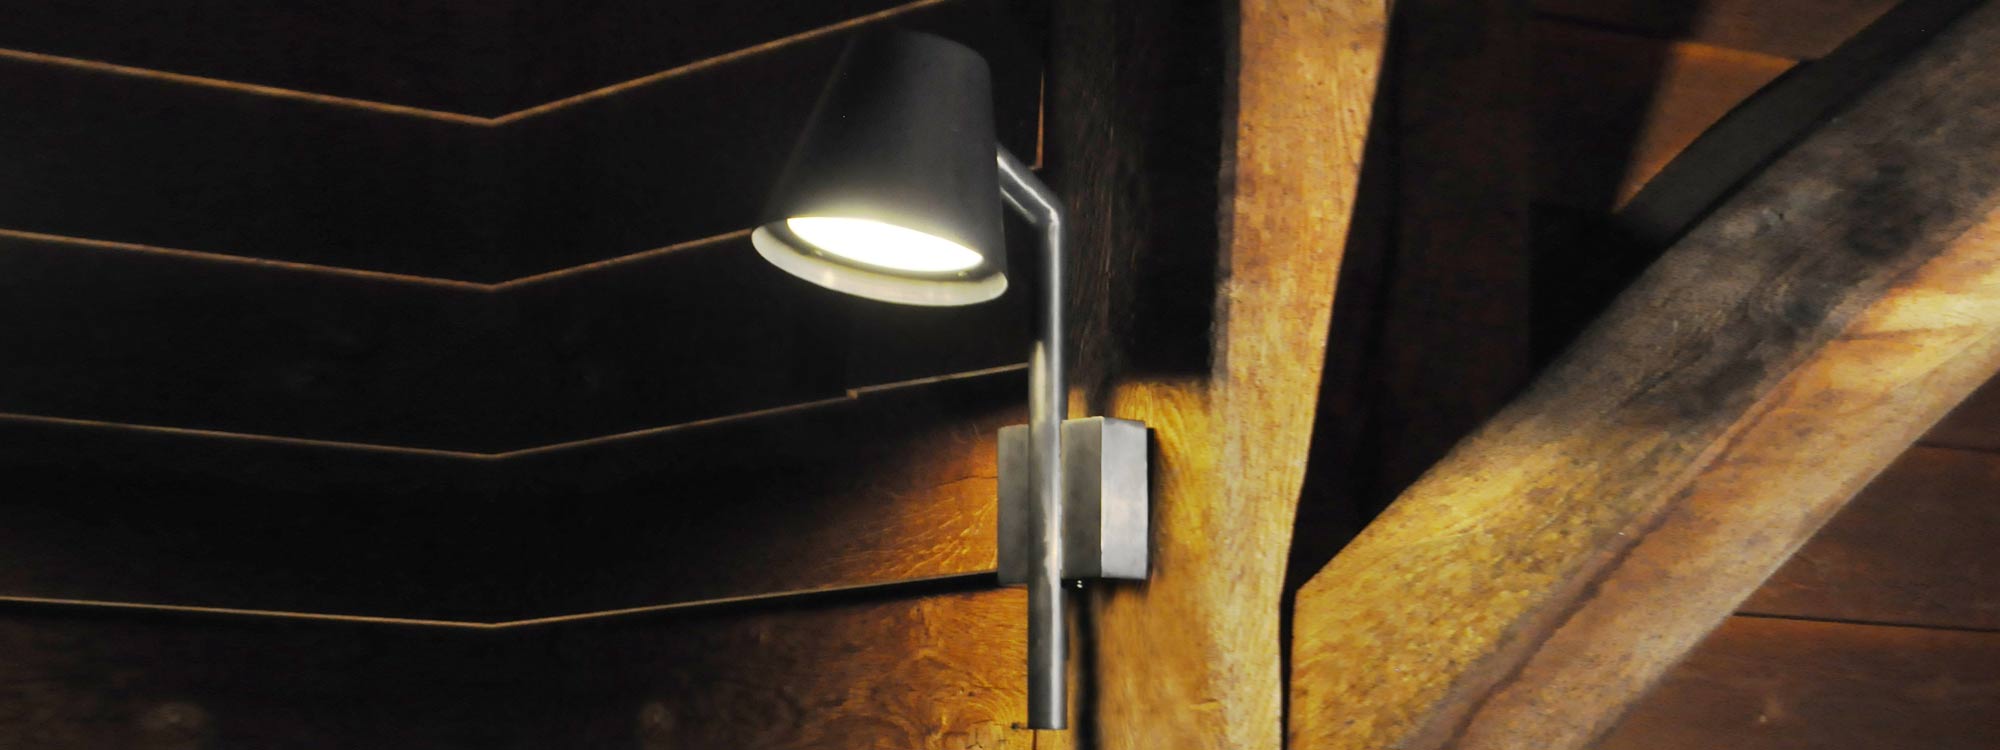 Nighttime image of illuminated Royal Botania Parker wall light in antique brass finish, mounted on wooden weather board